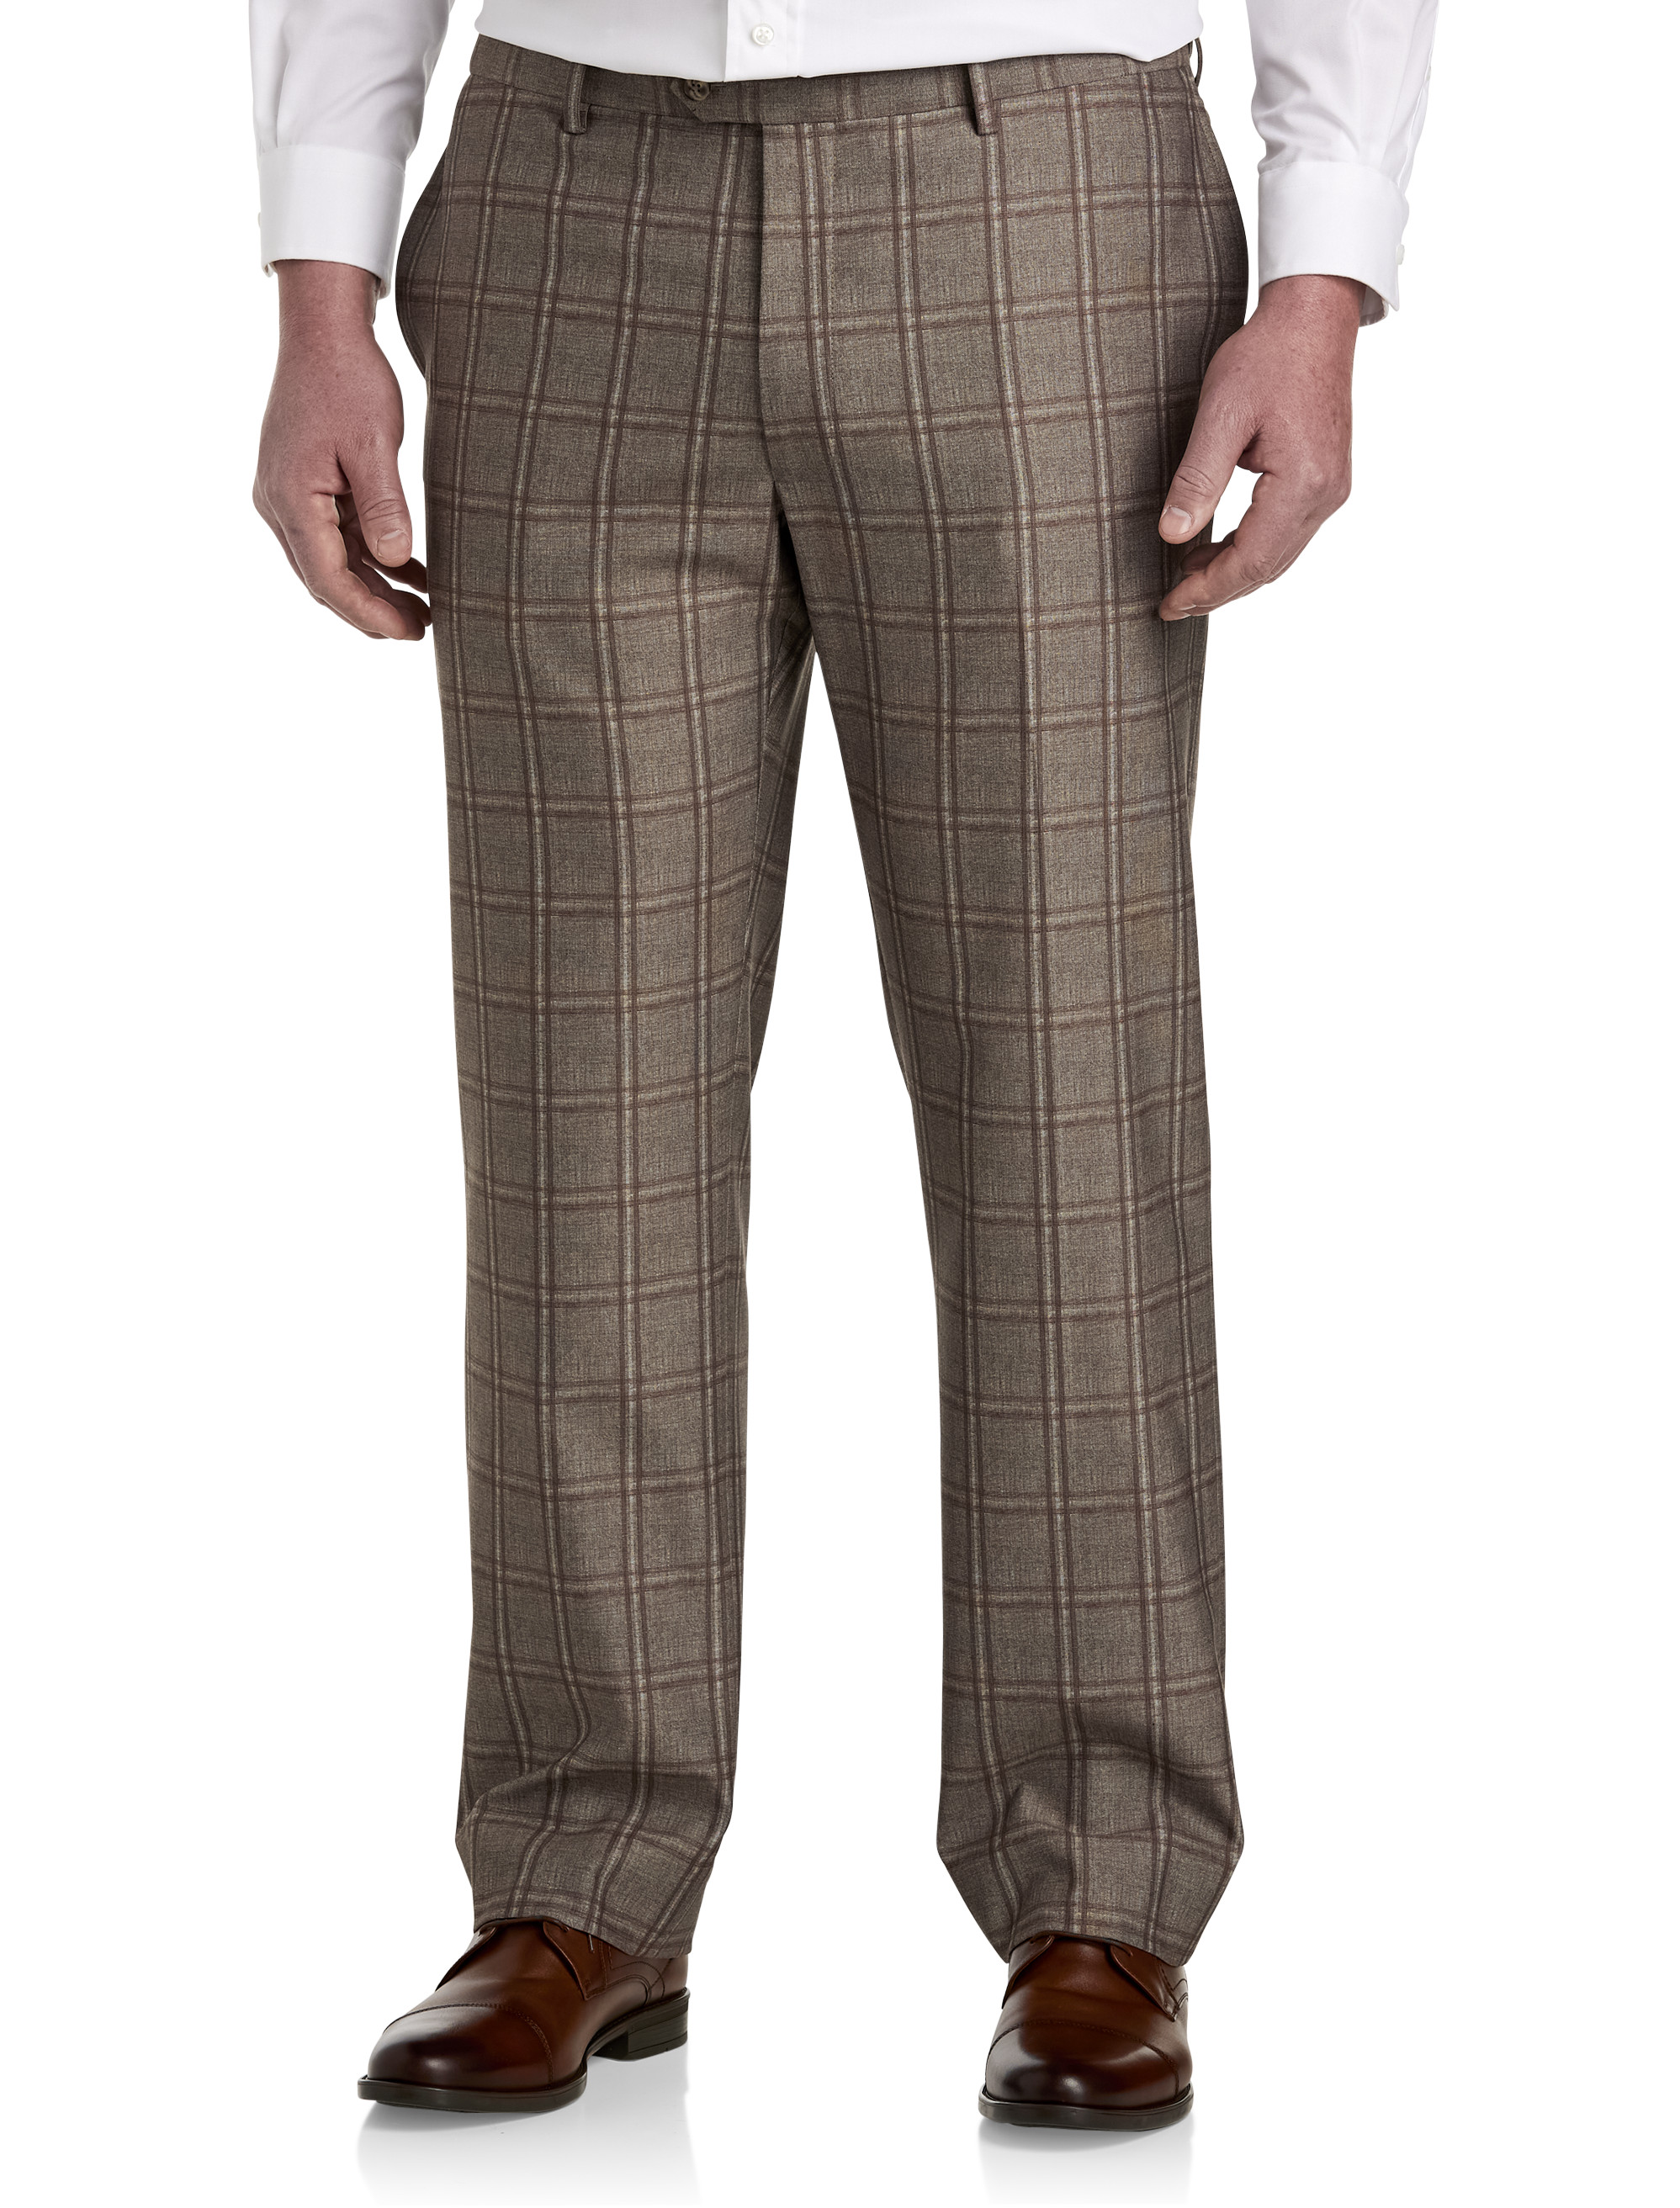 6 Great Flannel Dress Pants for Work 